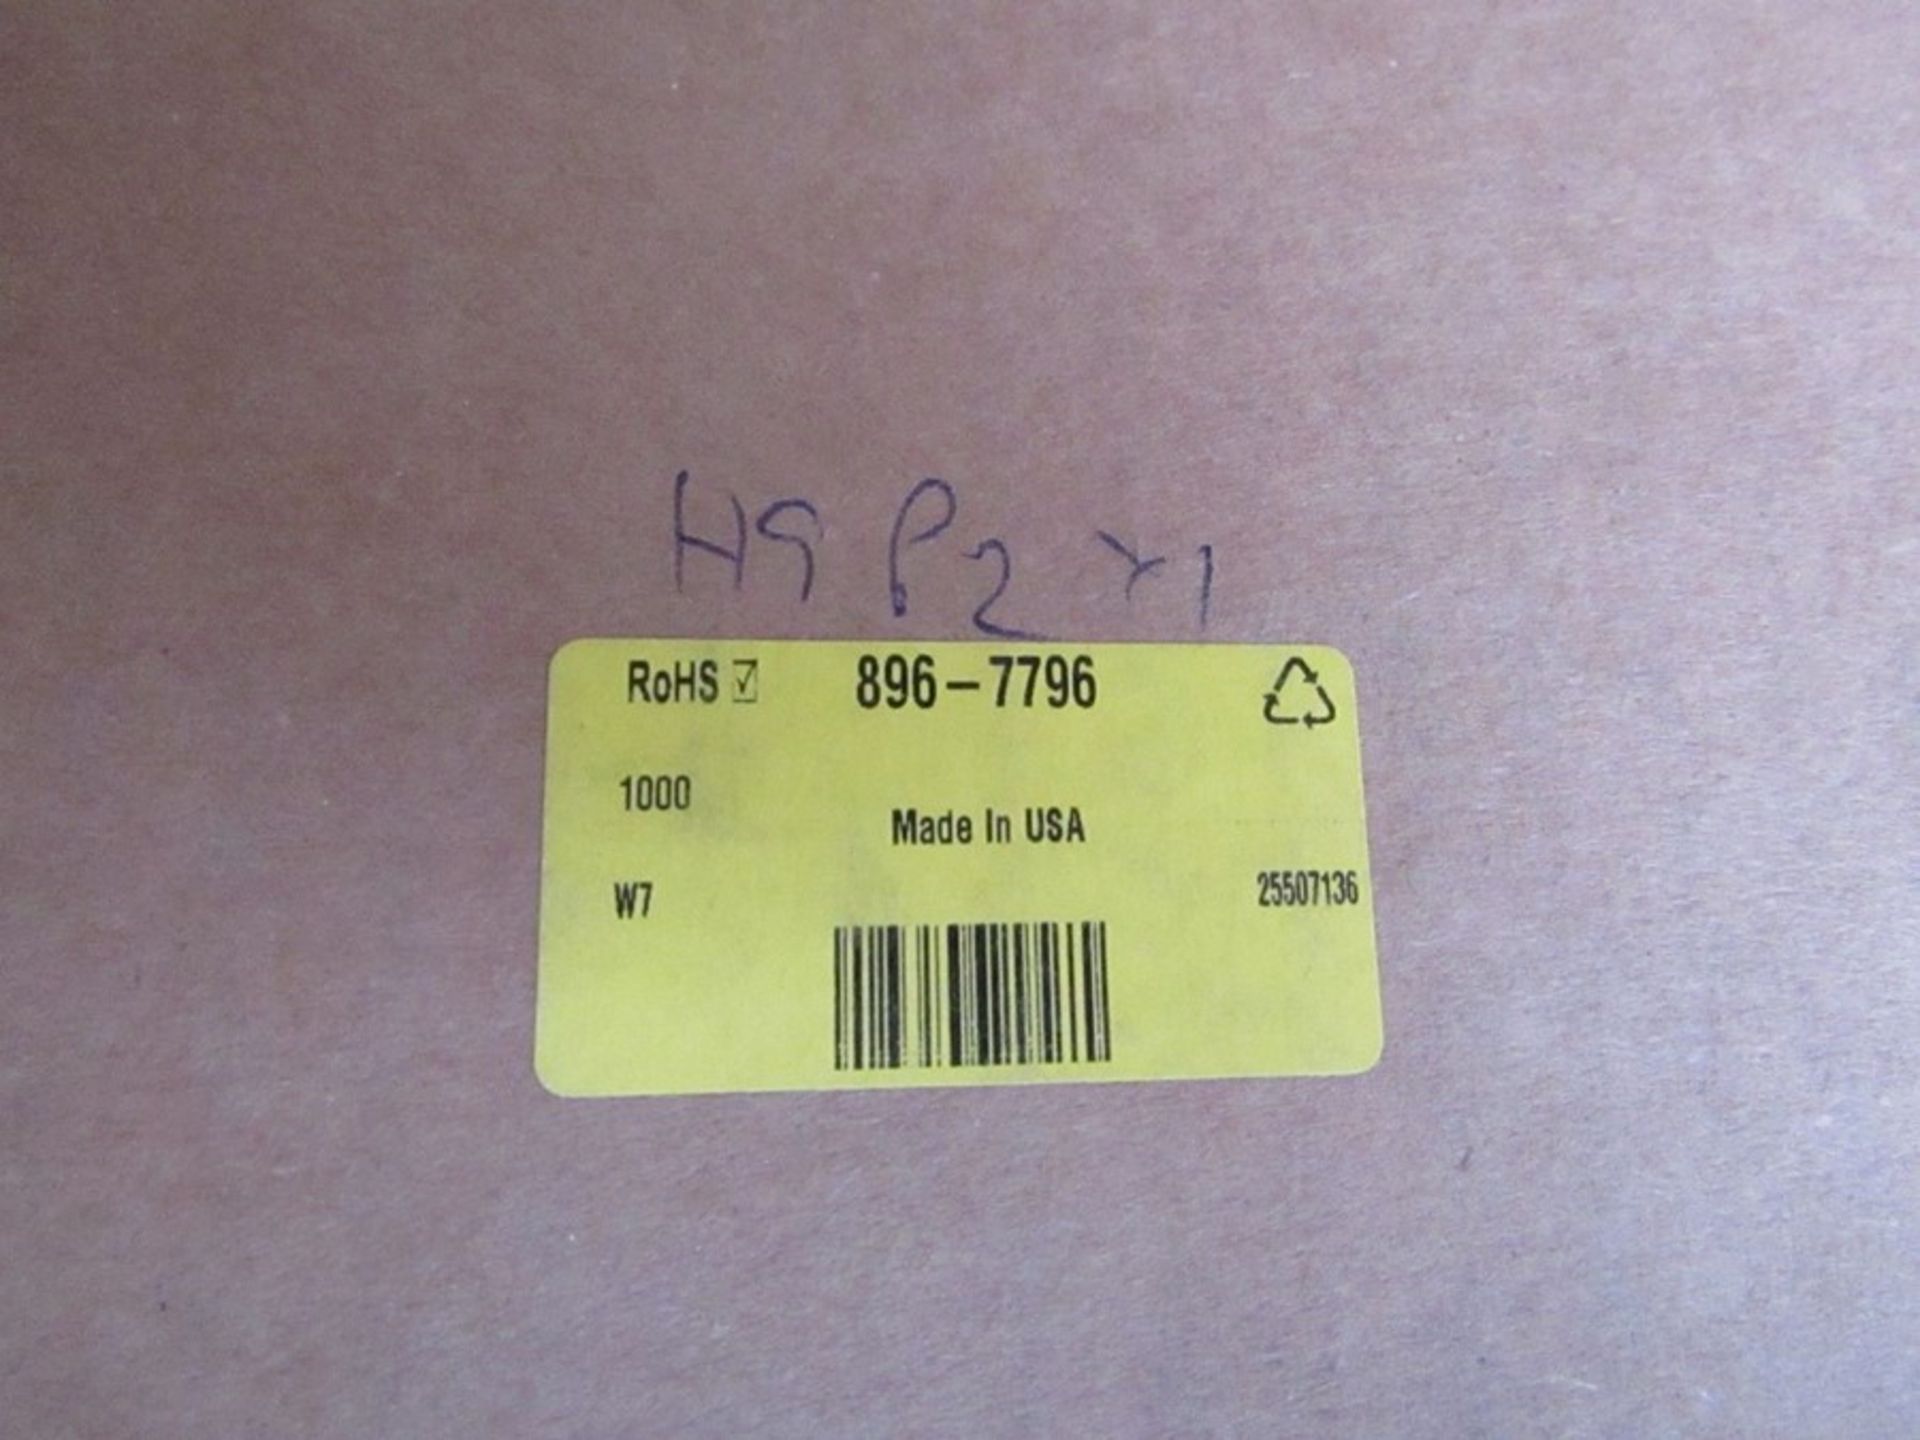 Box of 1000 TE Connectivity D-SCE Heat Shrink Cable Marker Yellow 1005fc 8967796 - Image 3 of 3